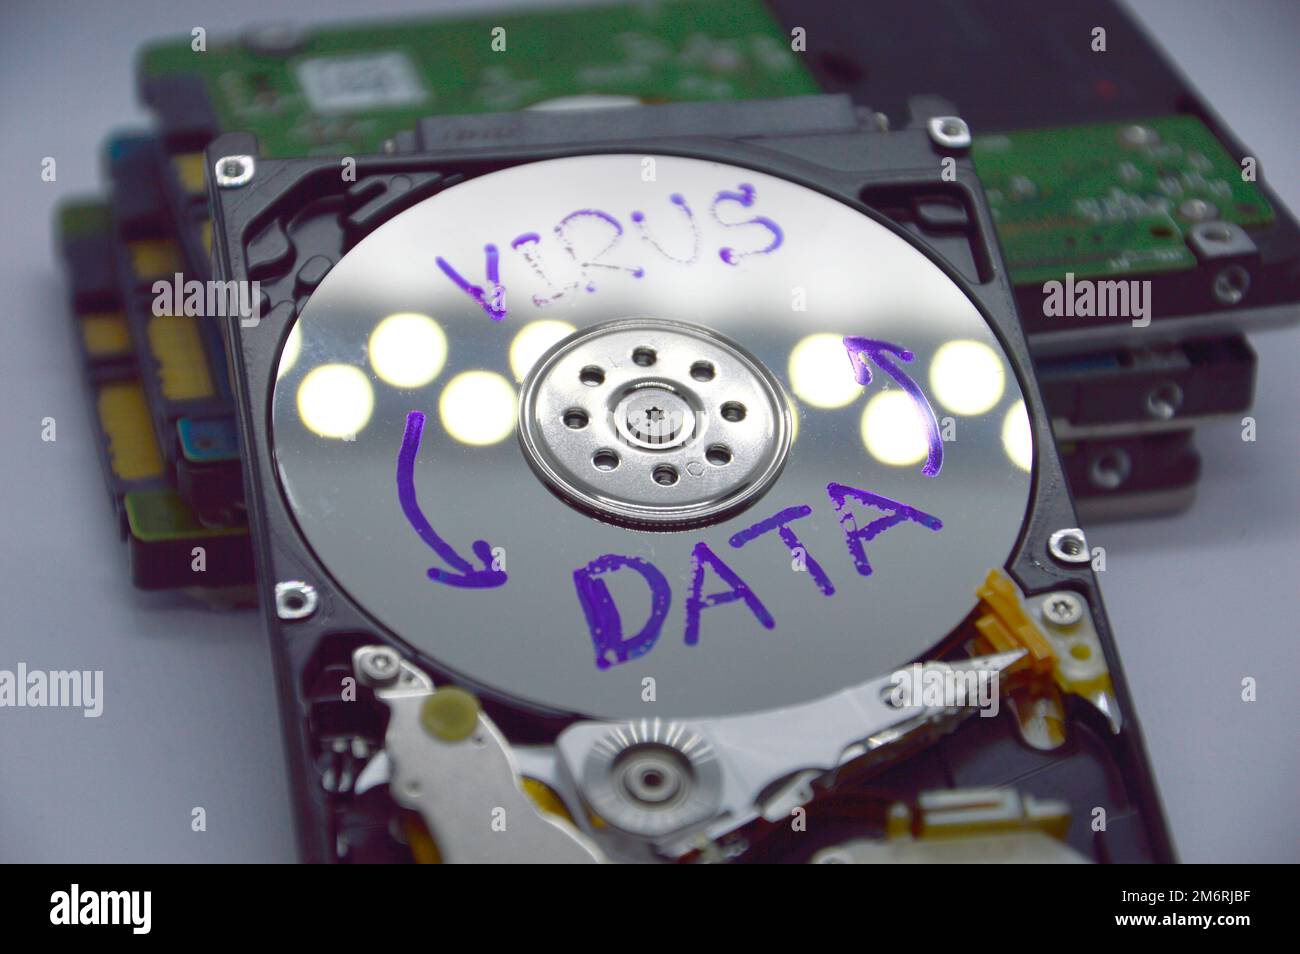 2.5-inch spinning disk type hard drive images are still commonly used today. Stock Photo